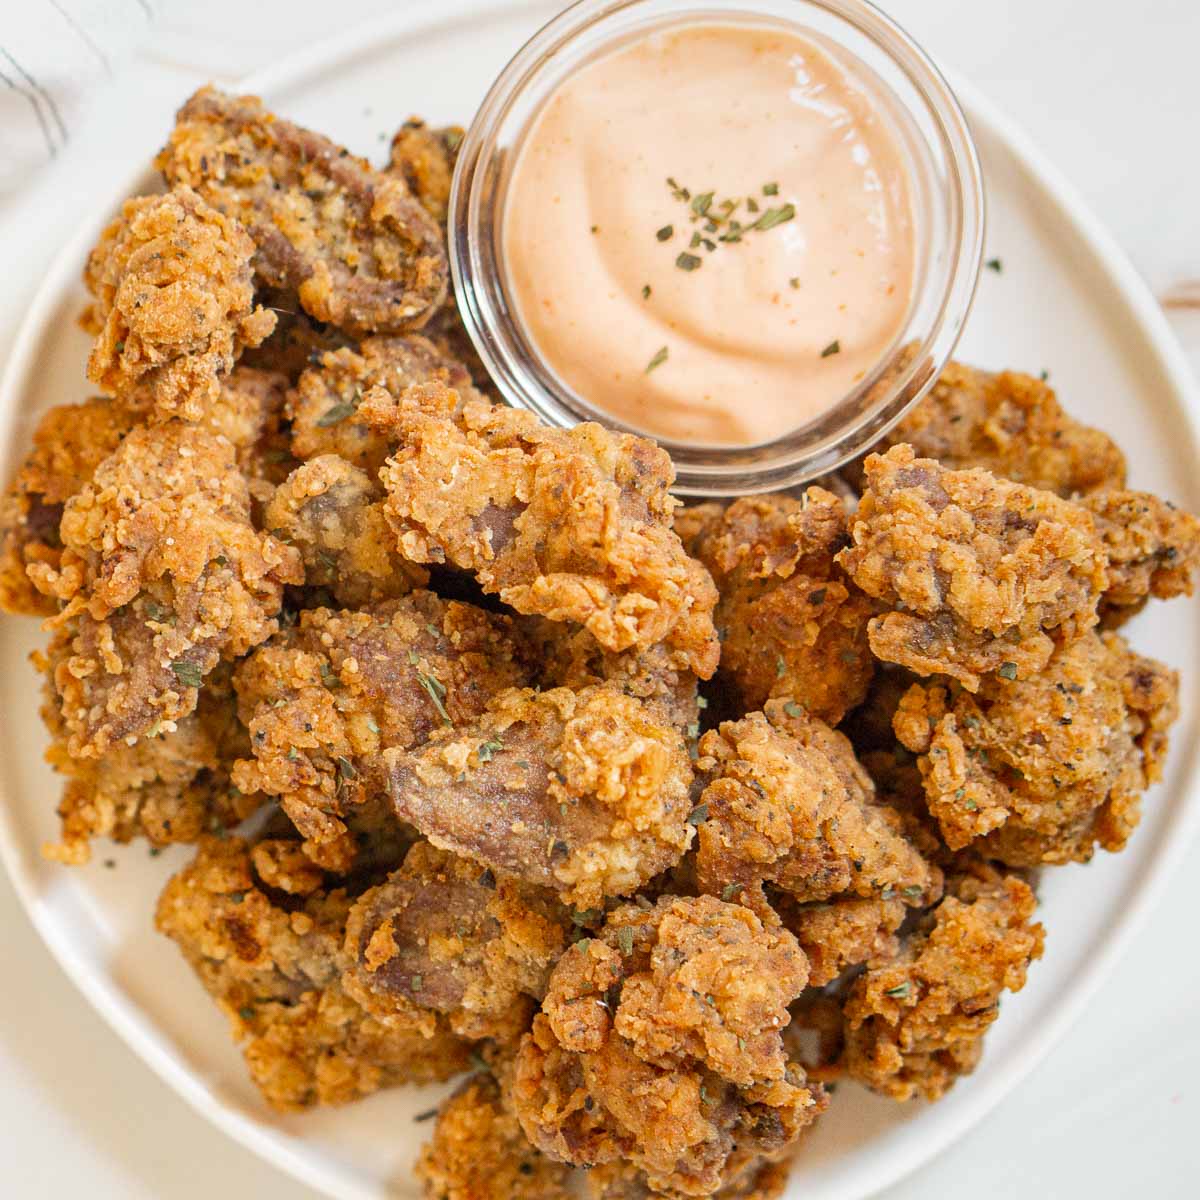 Overhead shot of popcorn fried chicken hearts with dipping sauce.